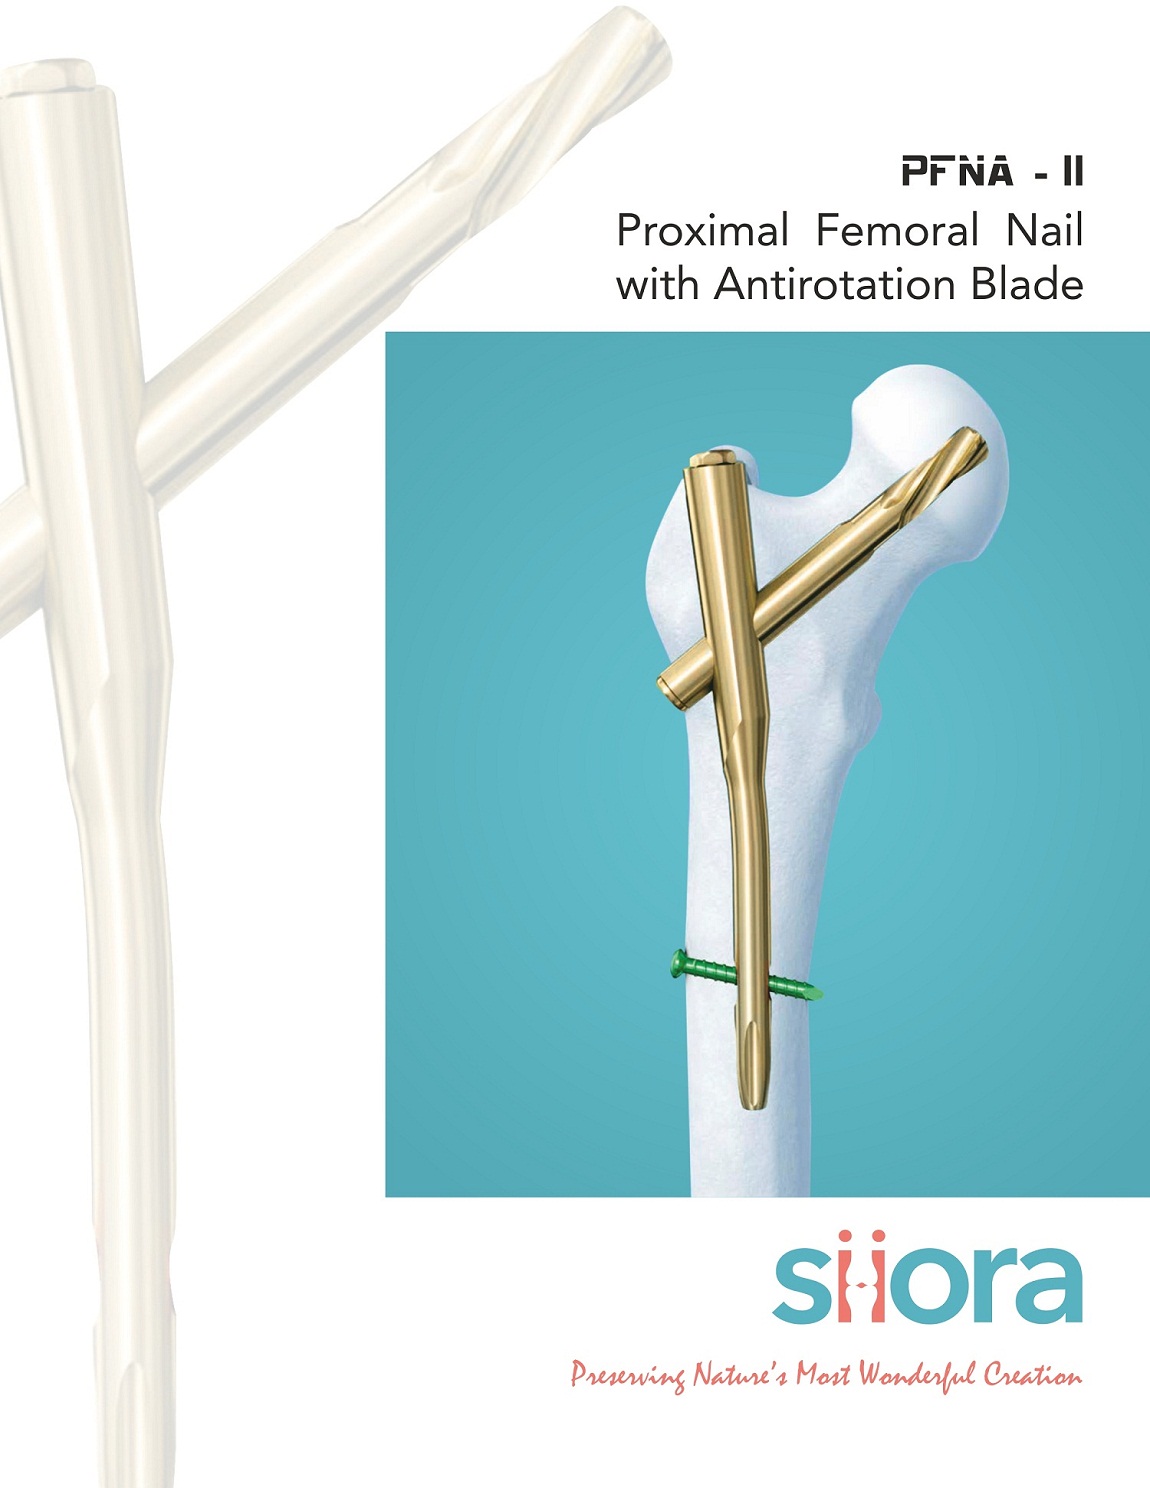 intraHEAL Proximal Femoral Nail Manufacturer, Supplier & Exporter | India